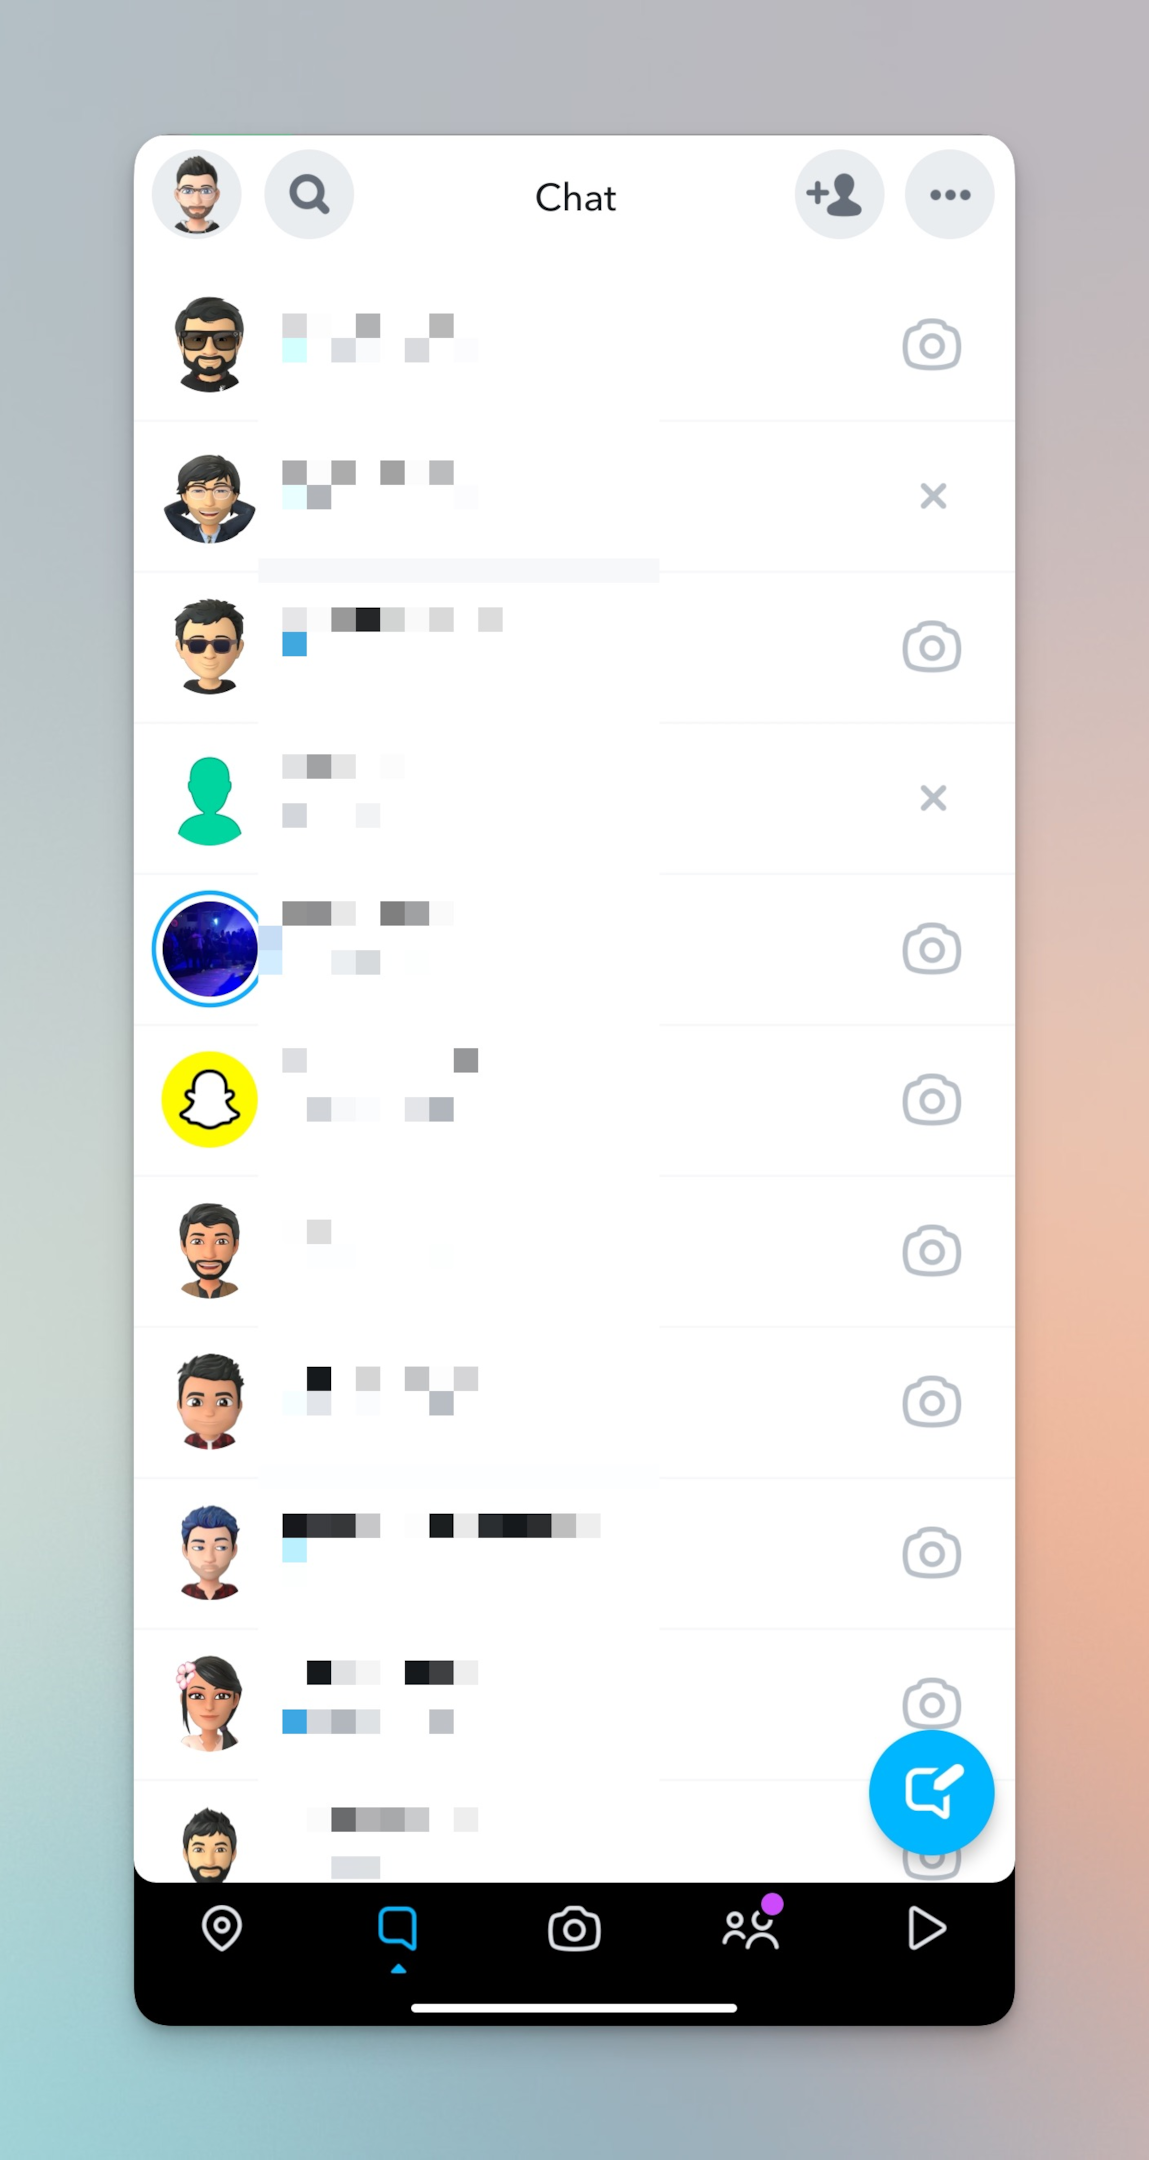 Remote.tools shows the chat section for deleting friends on Snapchat